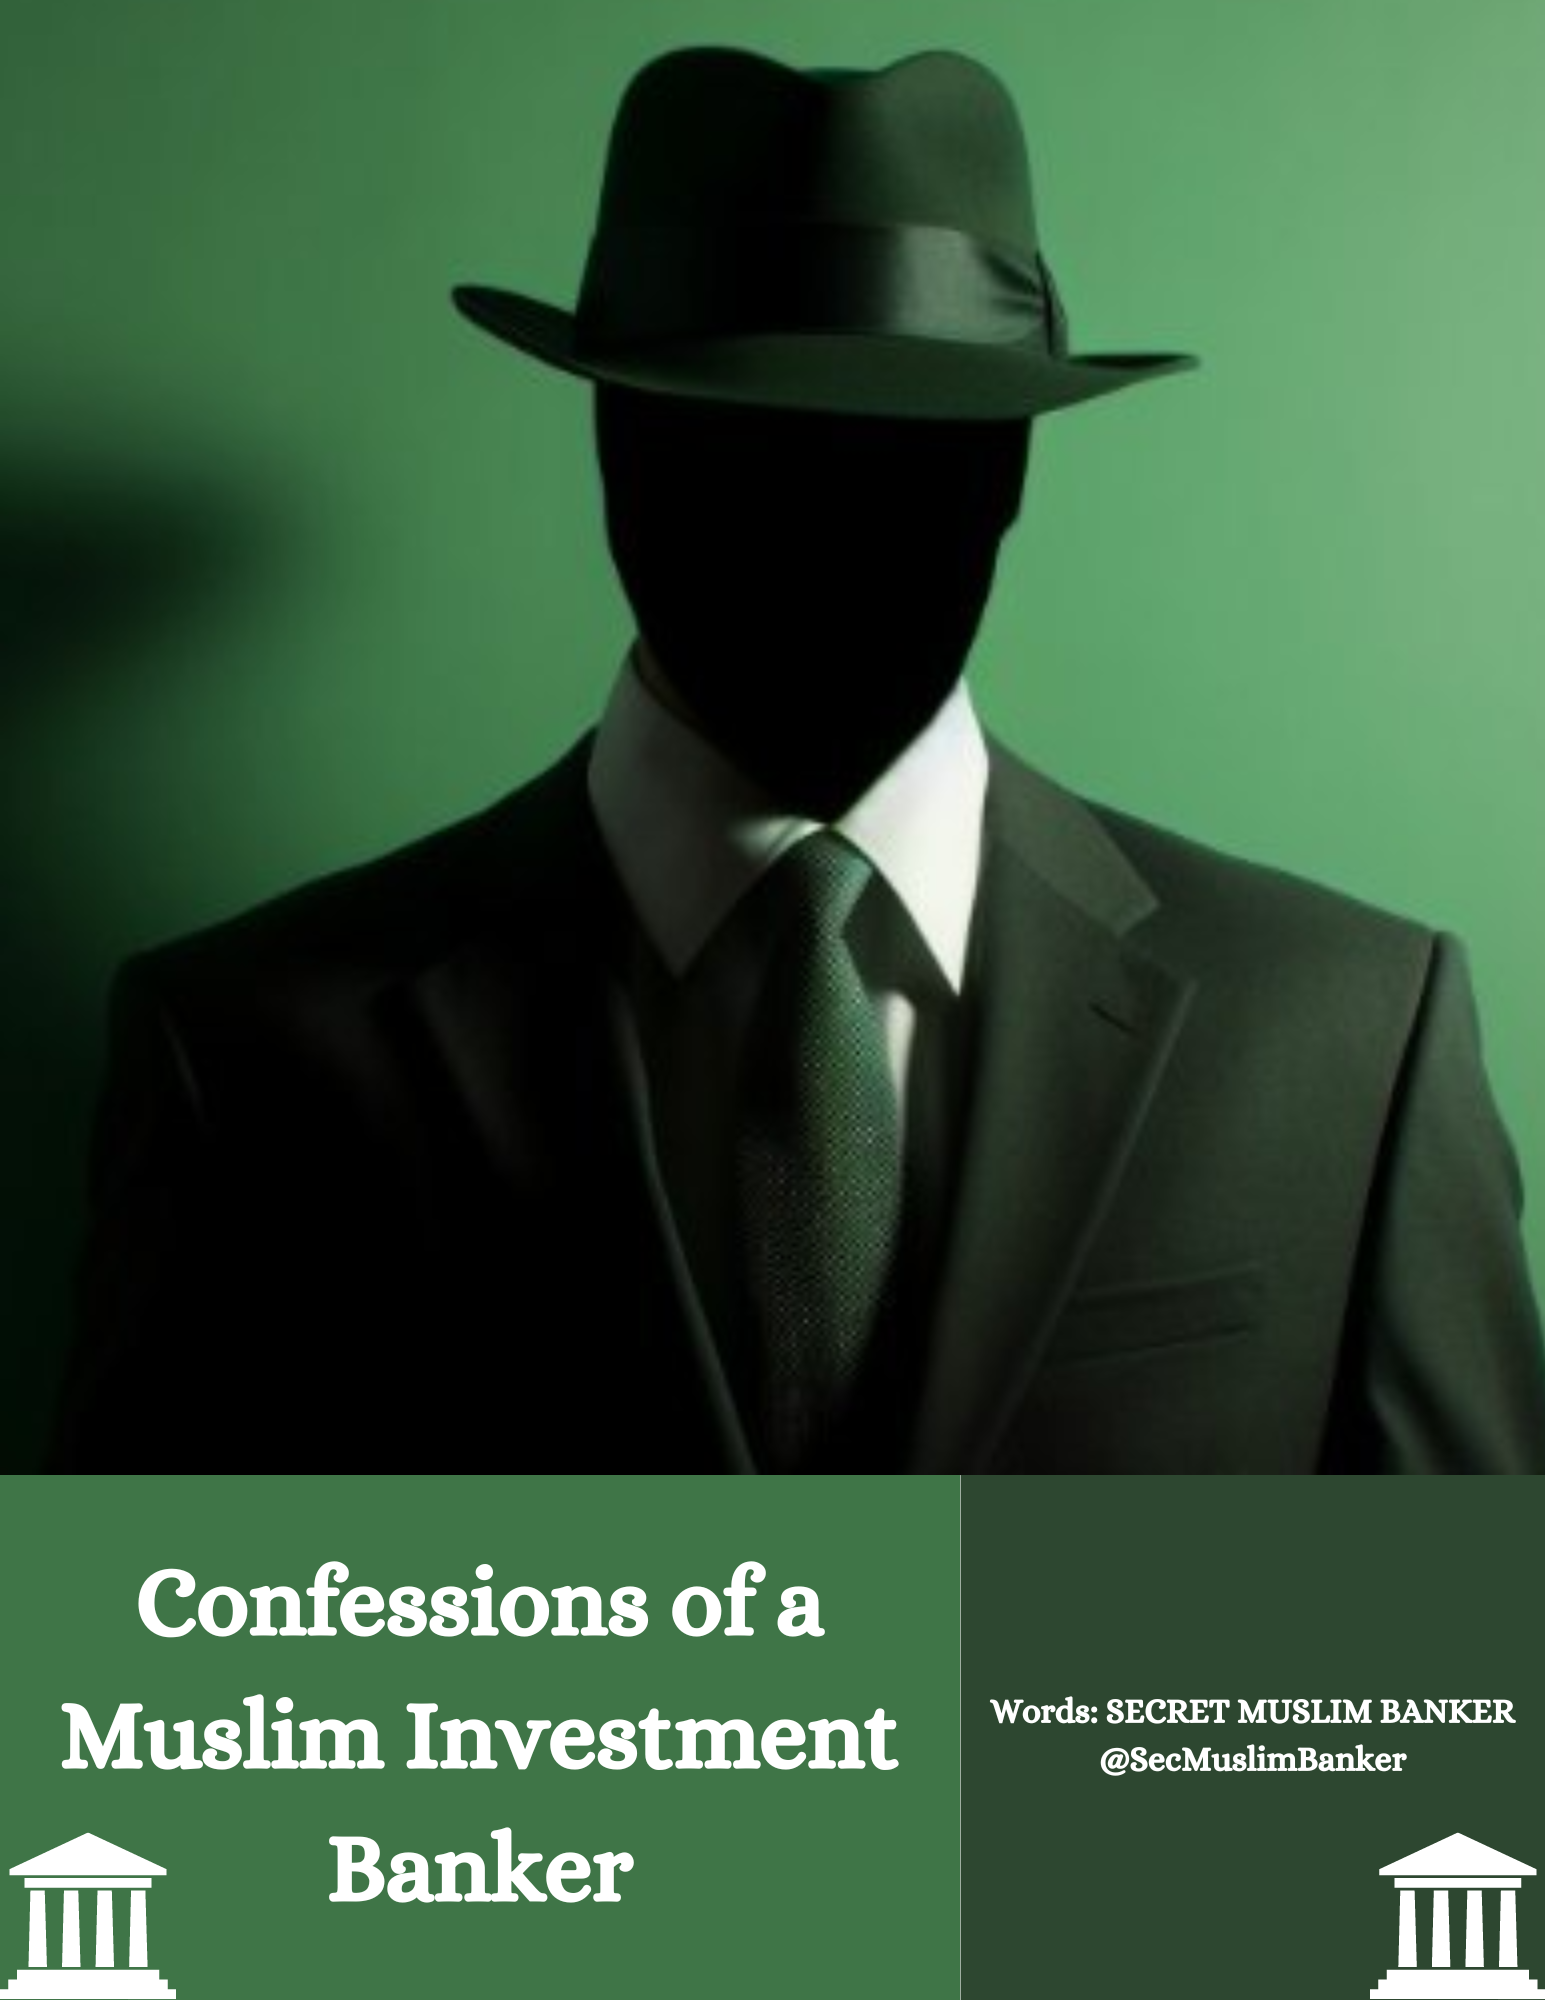 CONFESSIONS OF A MUSLIM INVESTMENT BANKER